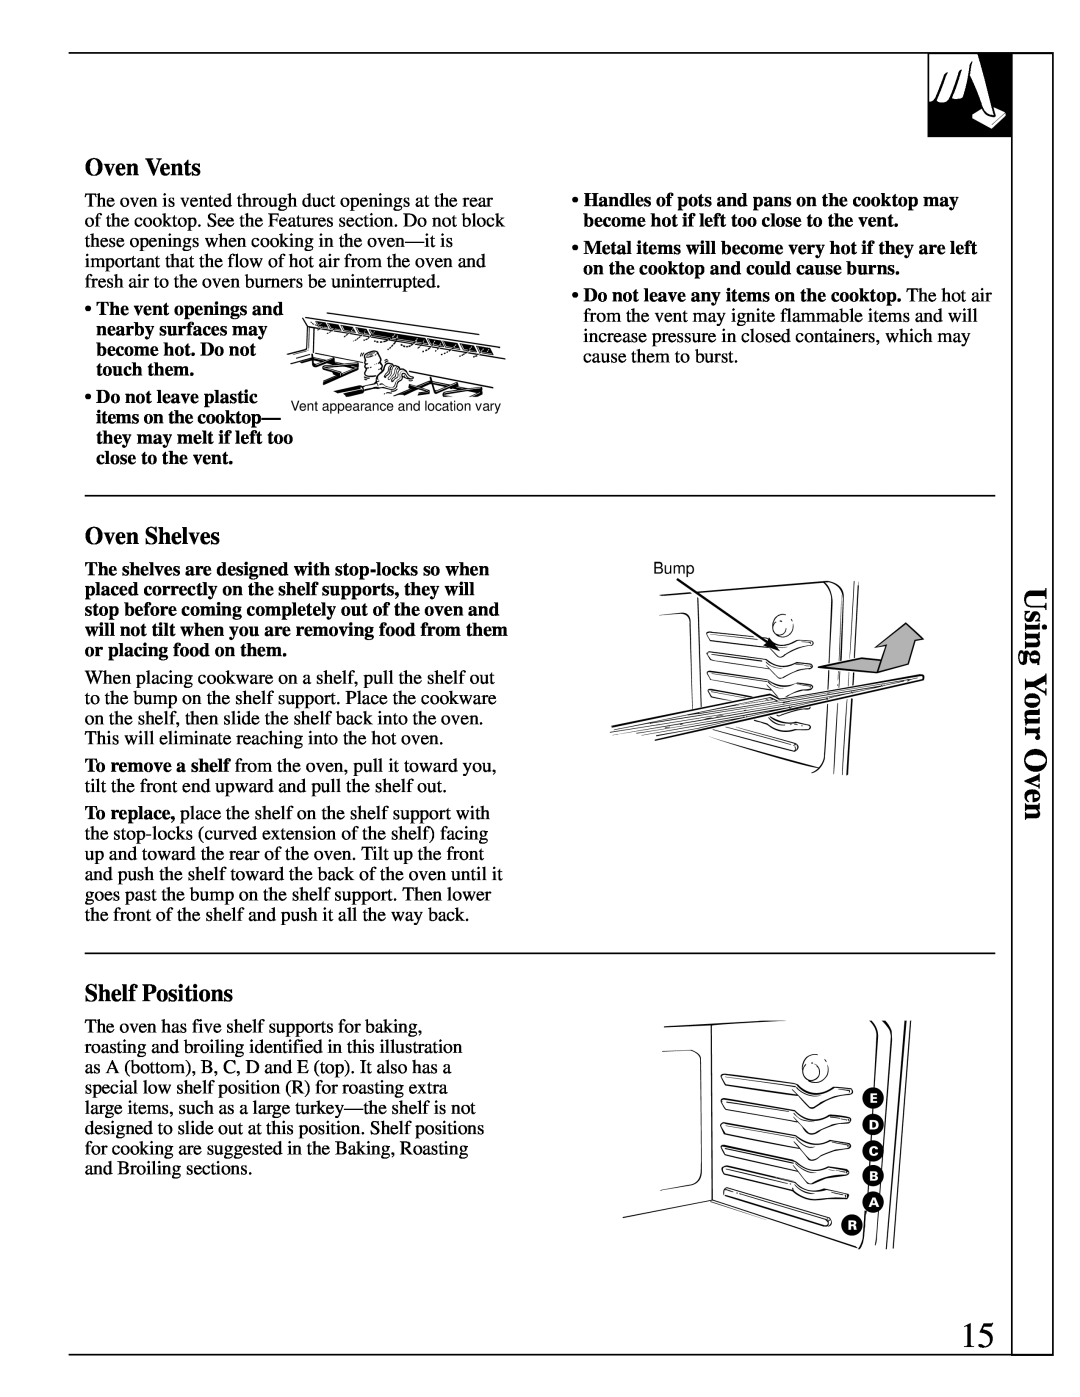 Hotpoint RGB744 installation instructions Using Your Oven, Oven Vents, Oven Shelves, Shelf Positions, and Broiling sections 